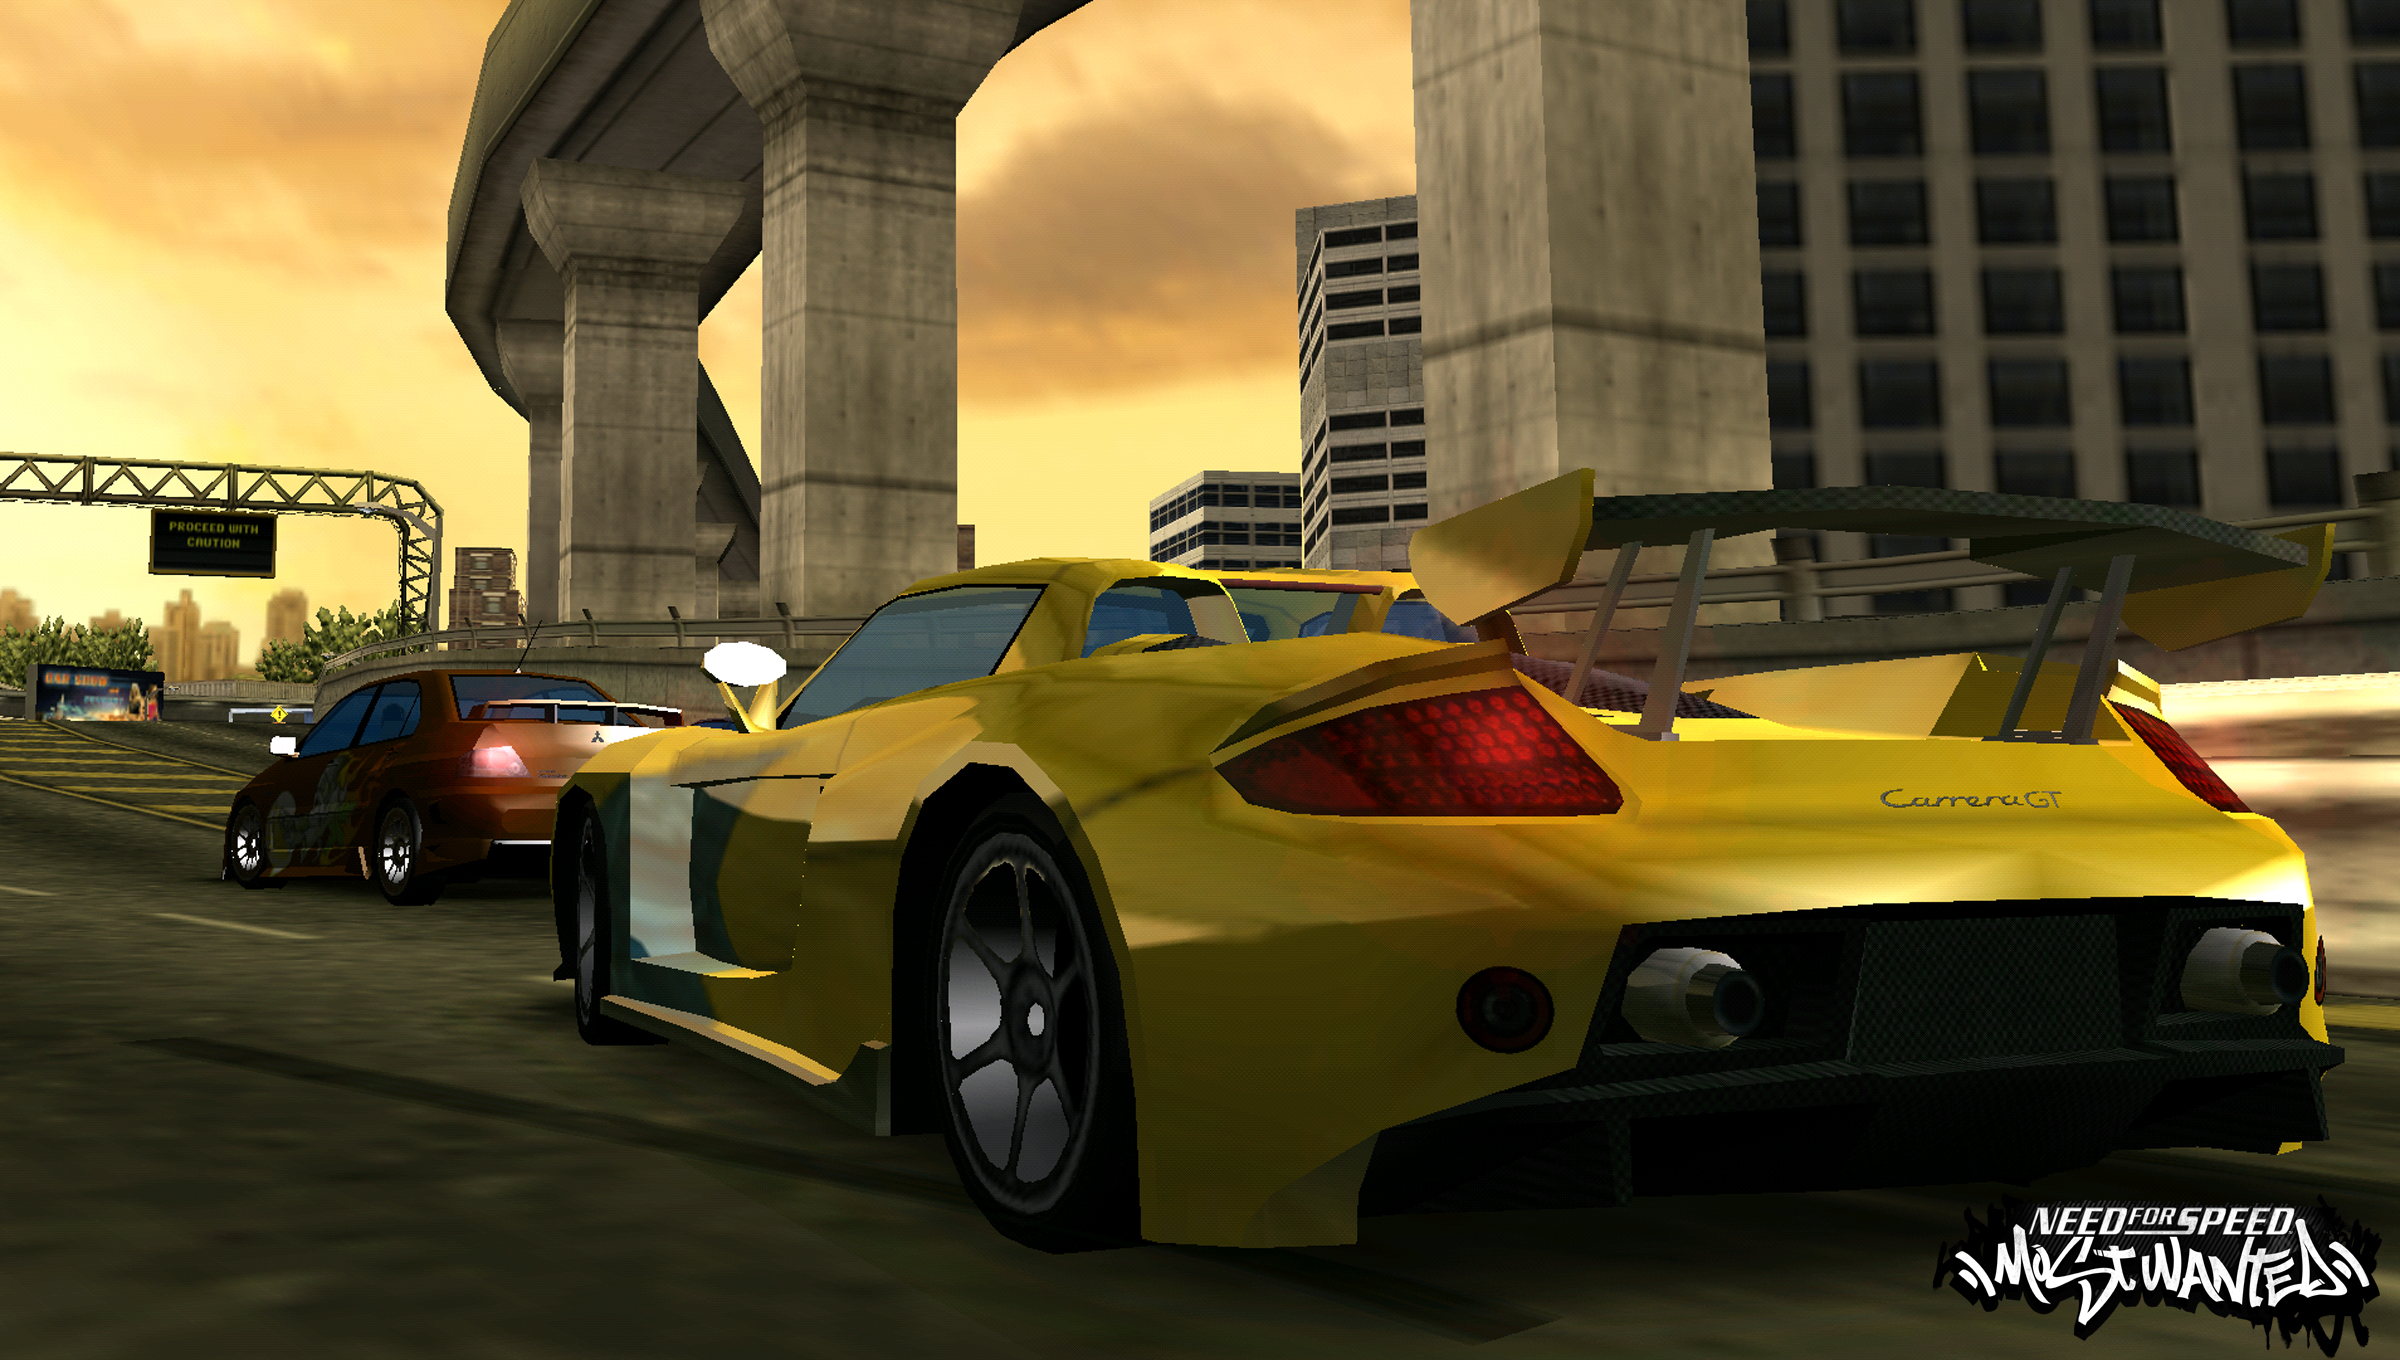 Need for speed most wanted ppsspp file for android pc